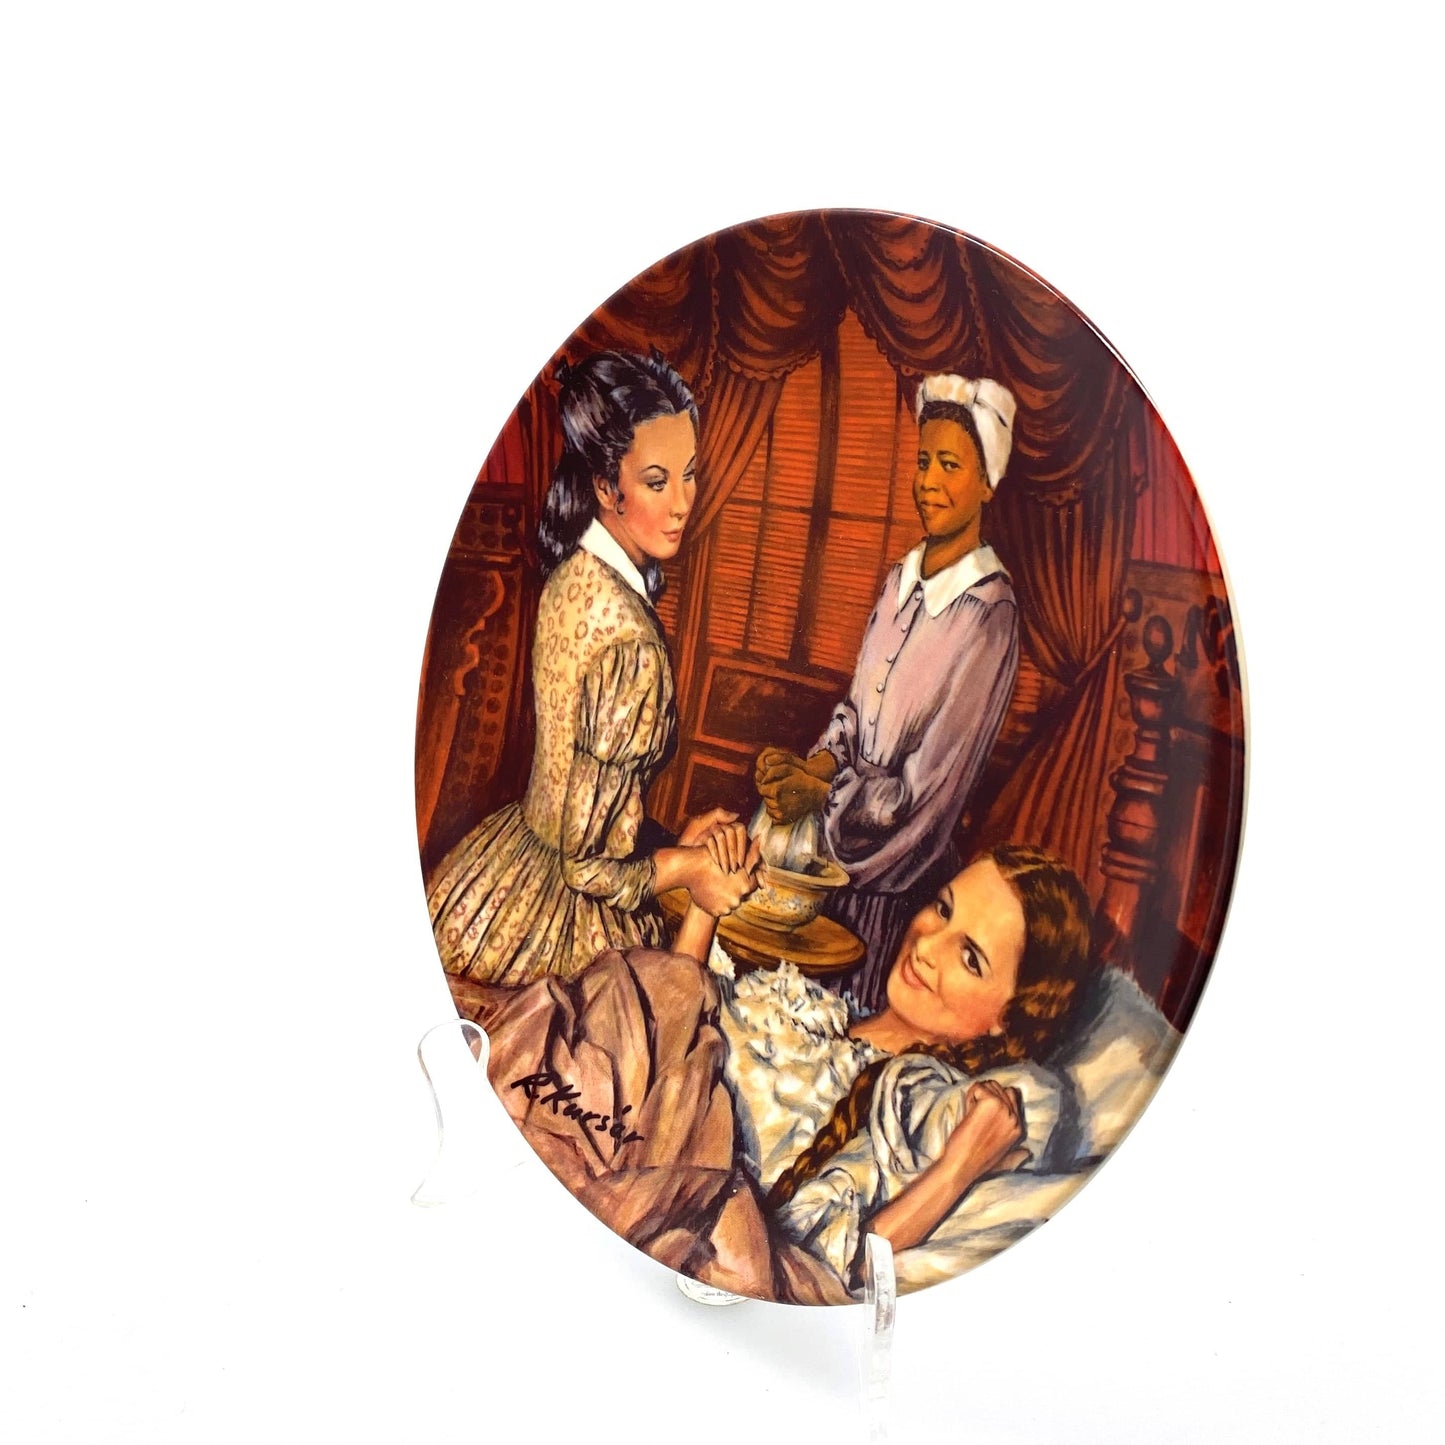 “Melanie Gives Birth” MGM Gone With The Wind 1983 Collectors Plate by Raymond Kursar